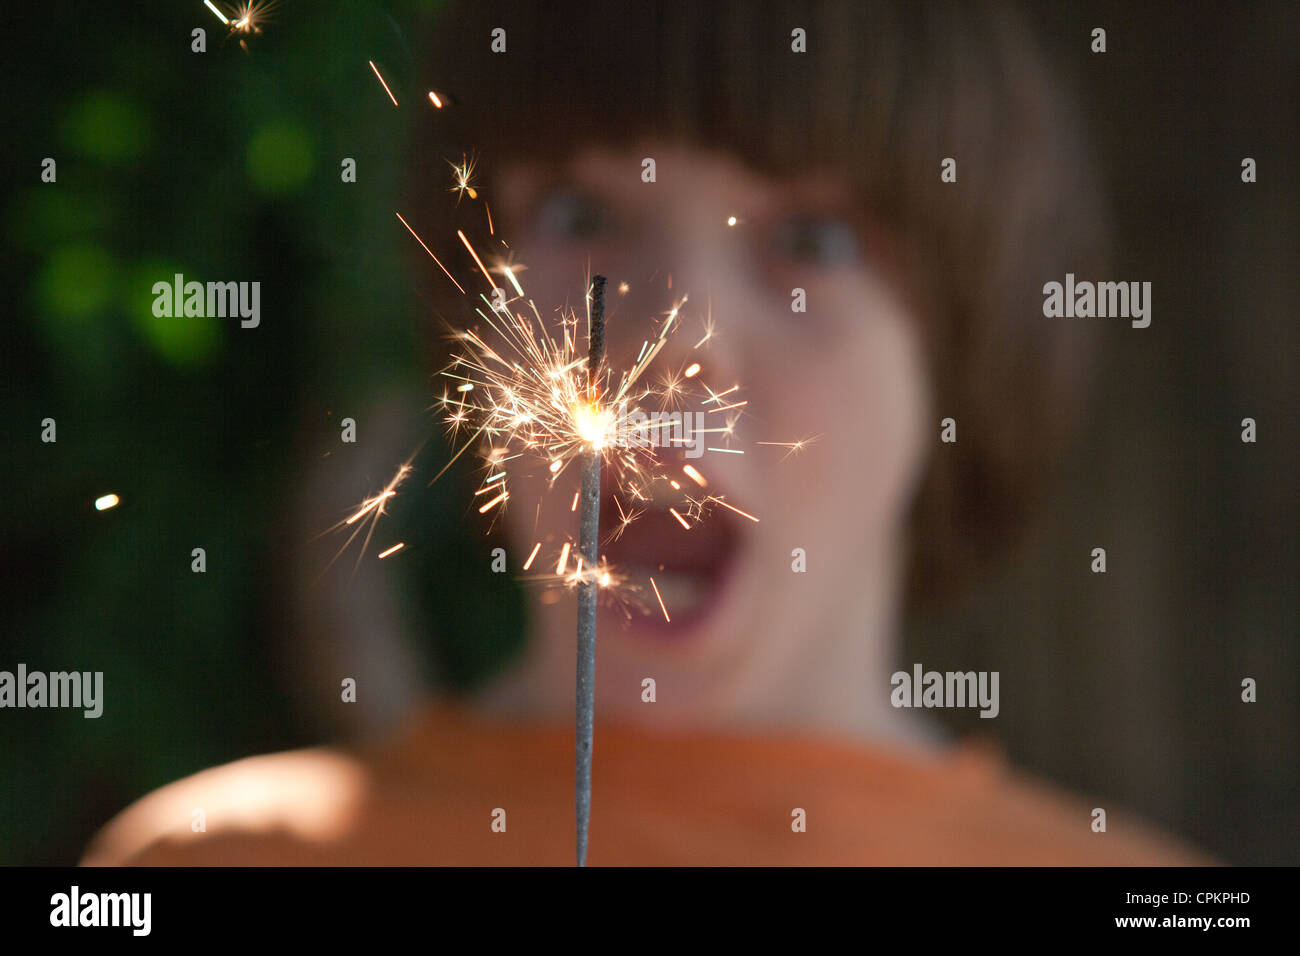 Close up of a boy holding a sparkler with surprised expression on his face. Stock Photo